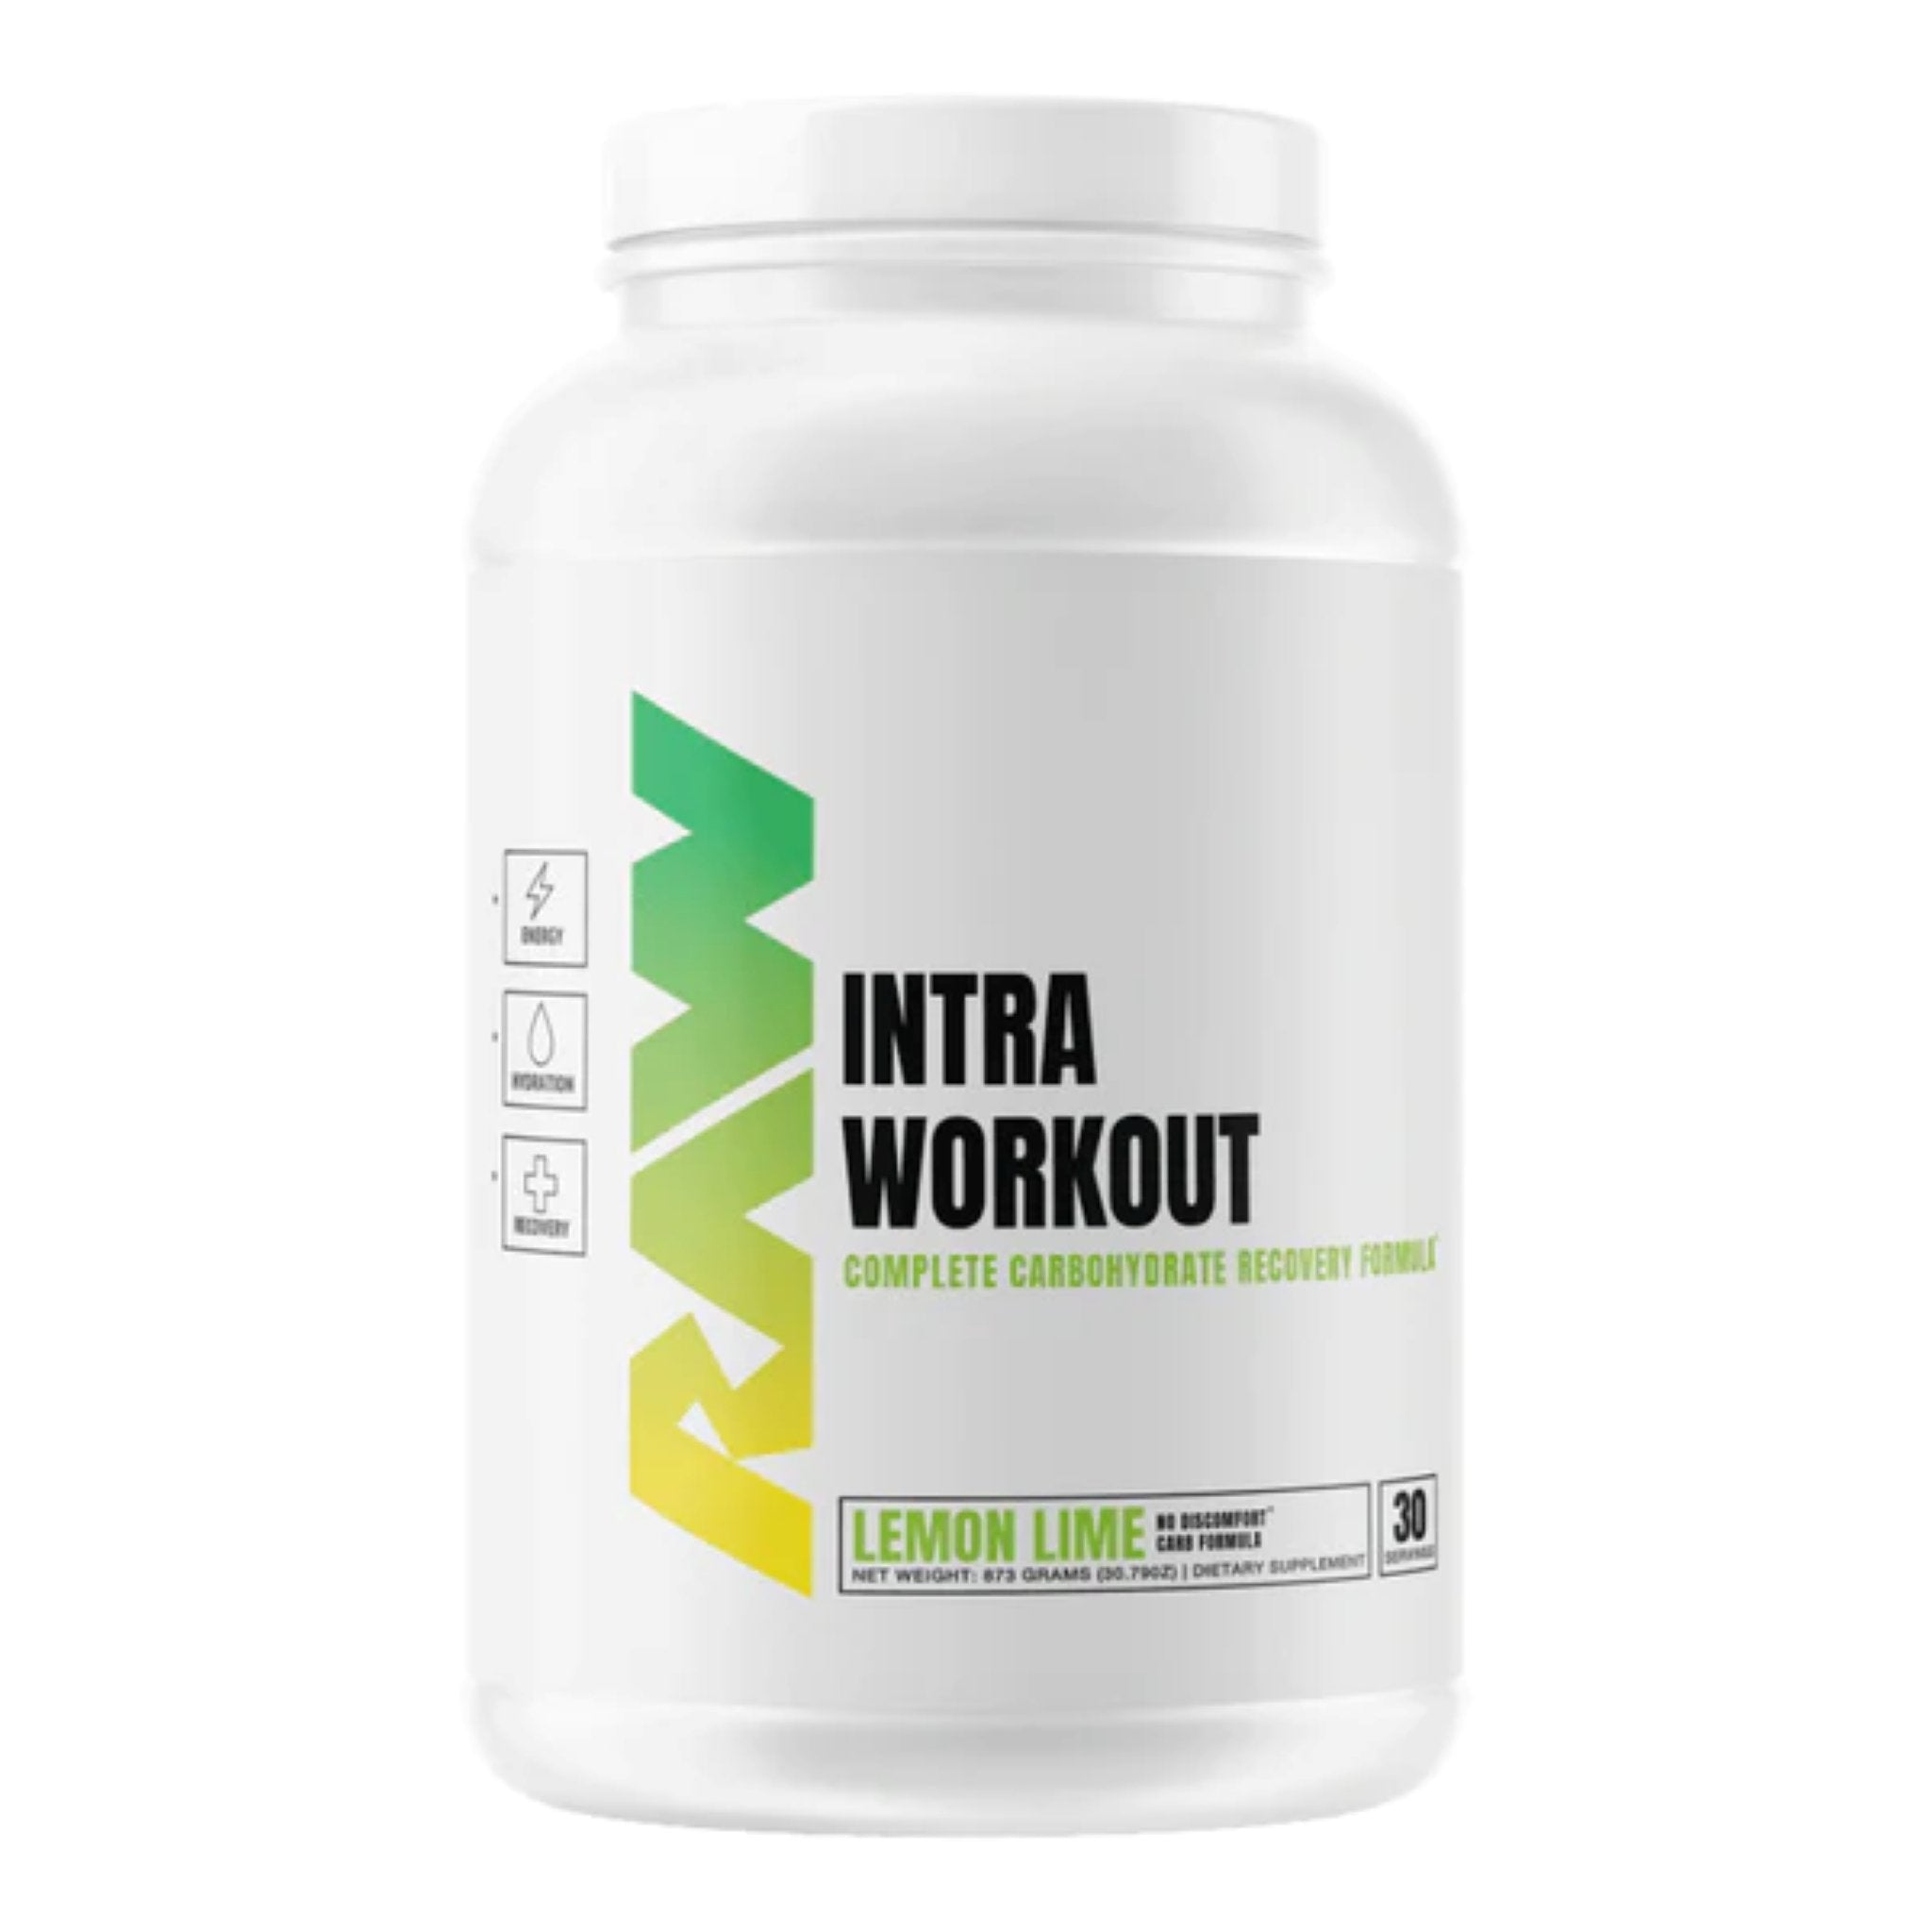 in cat timp intra banii prin transfer bancar Supliment alimentar Intra Workout, RAW Nutrition, INTRA-WORKOUT, 873g